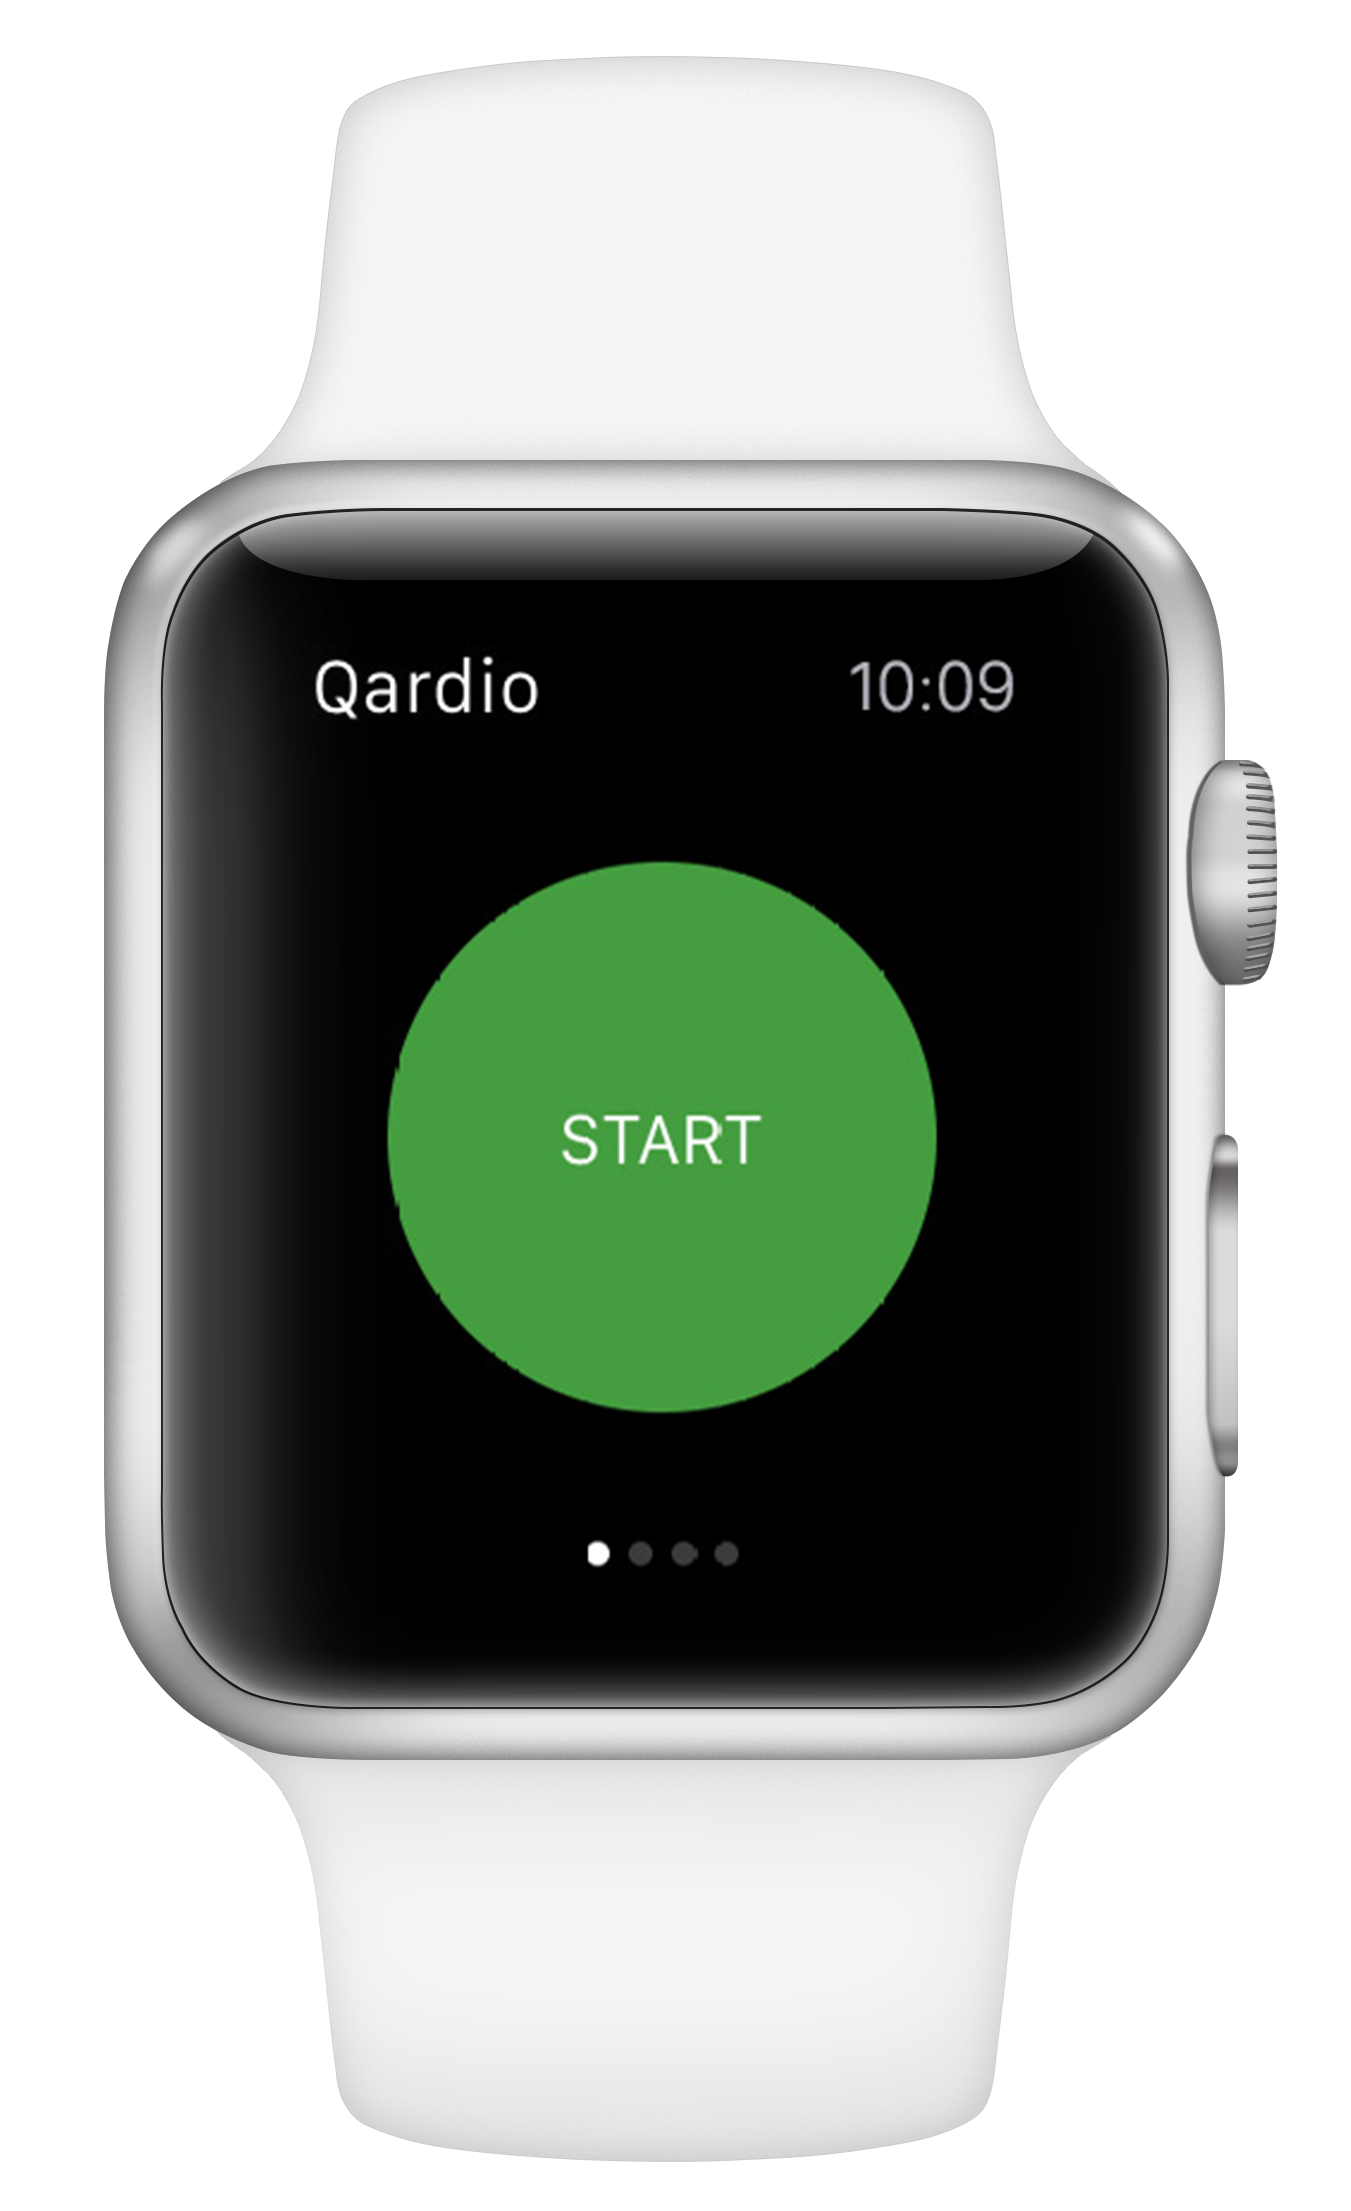 How to measure blood pressure with Apple Watch